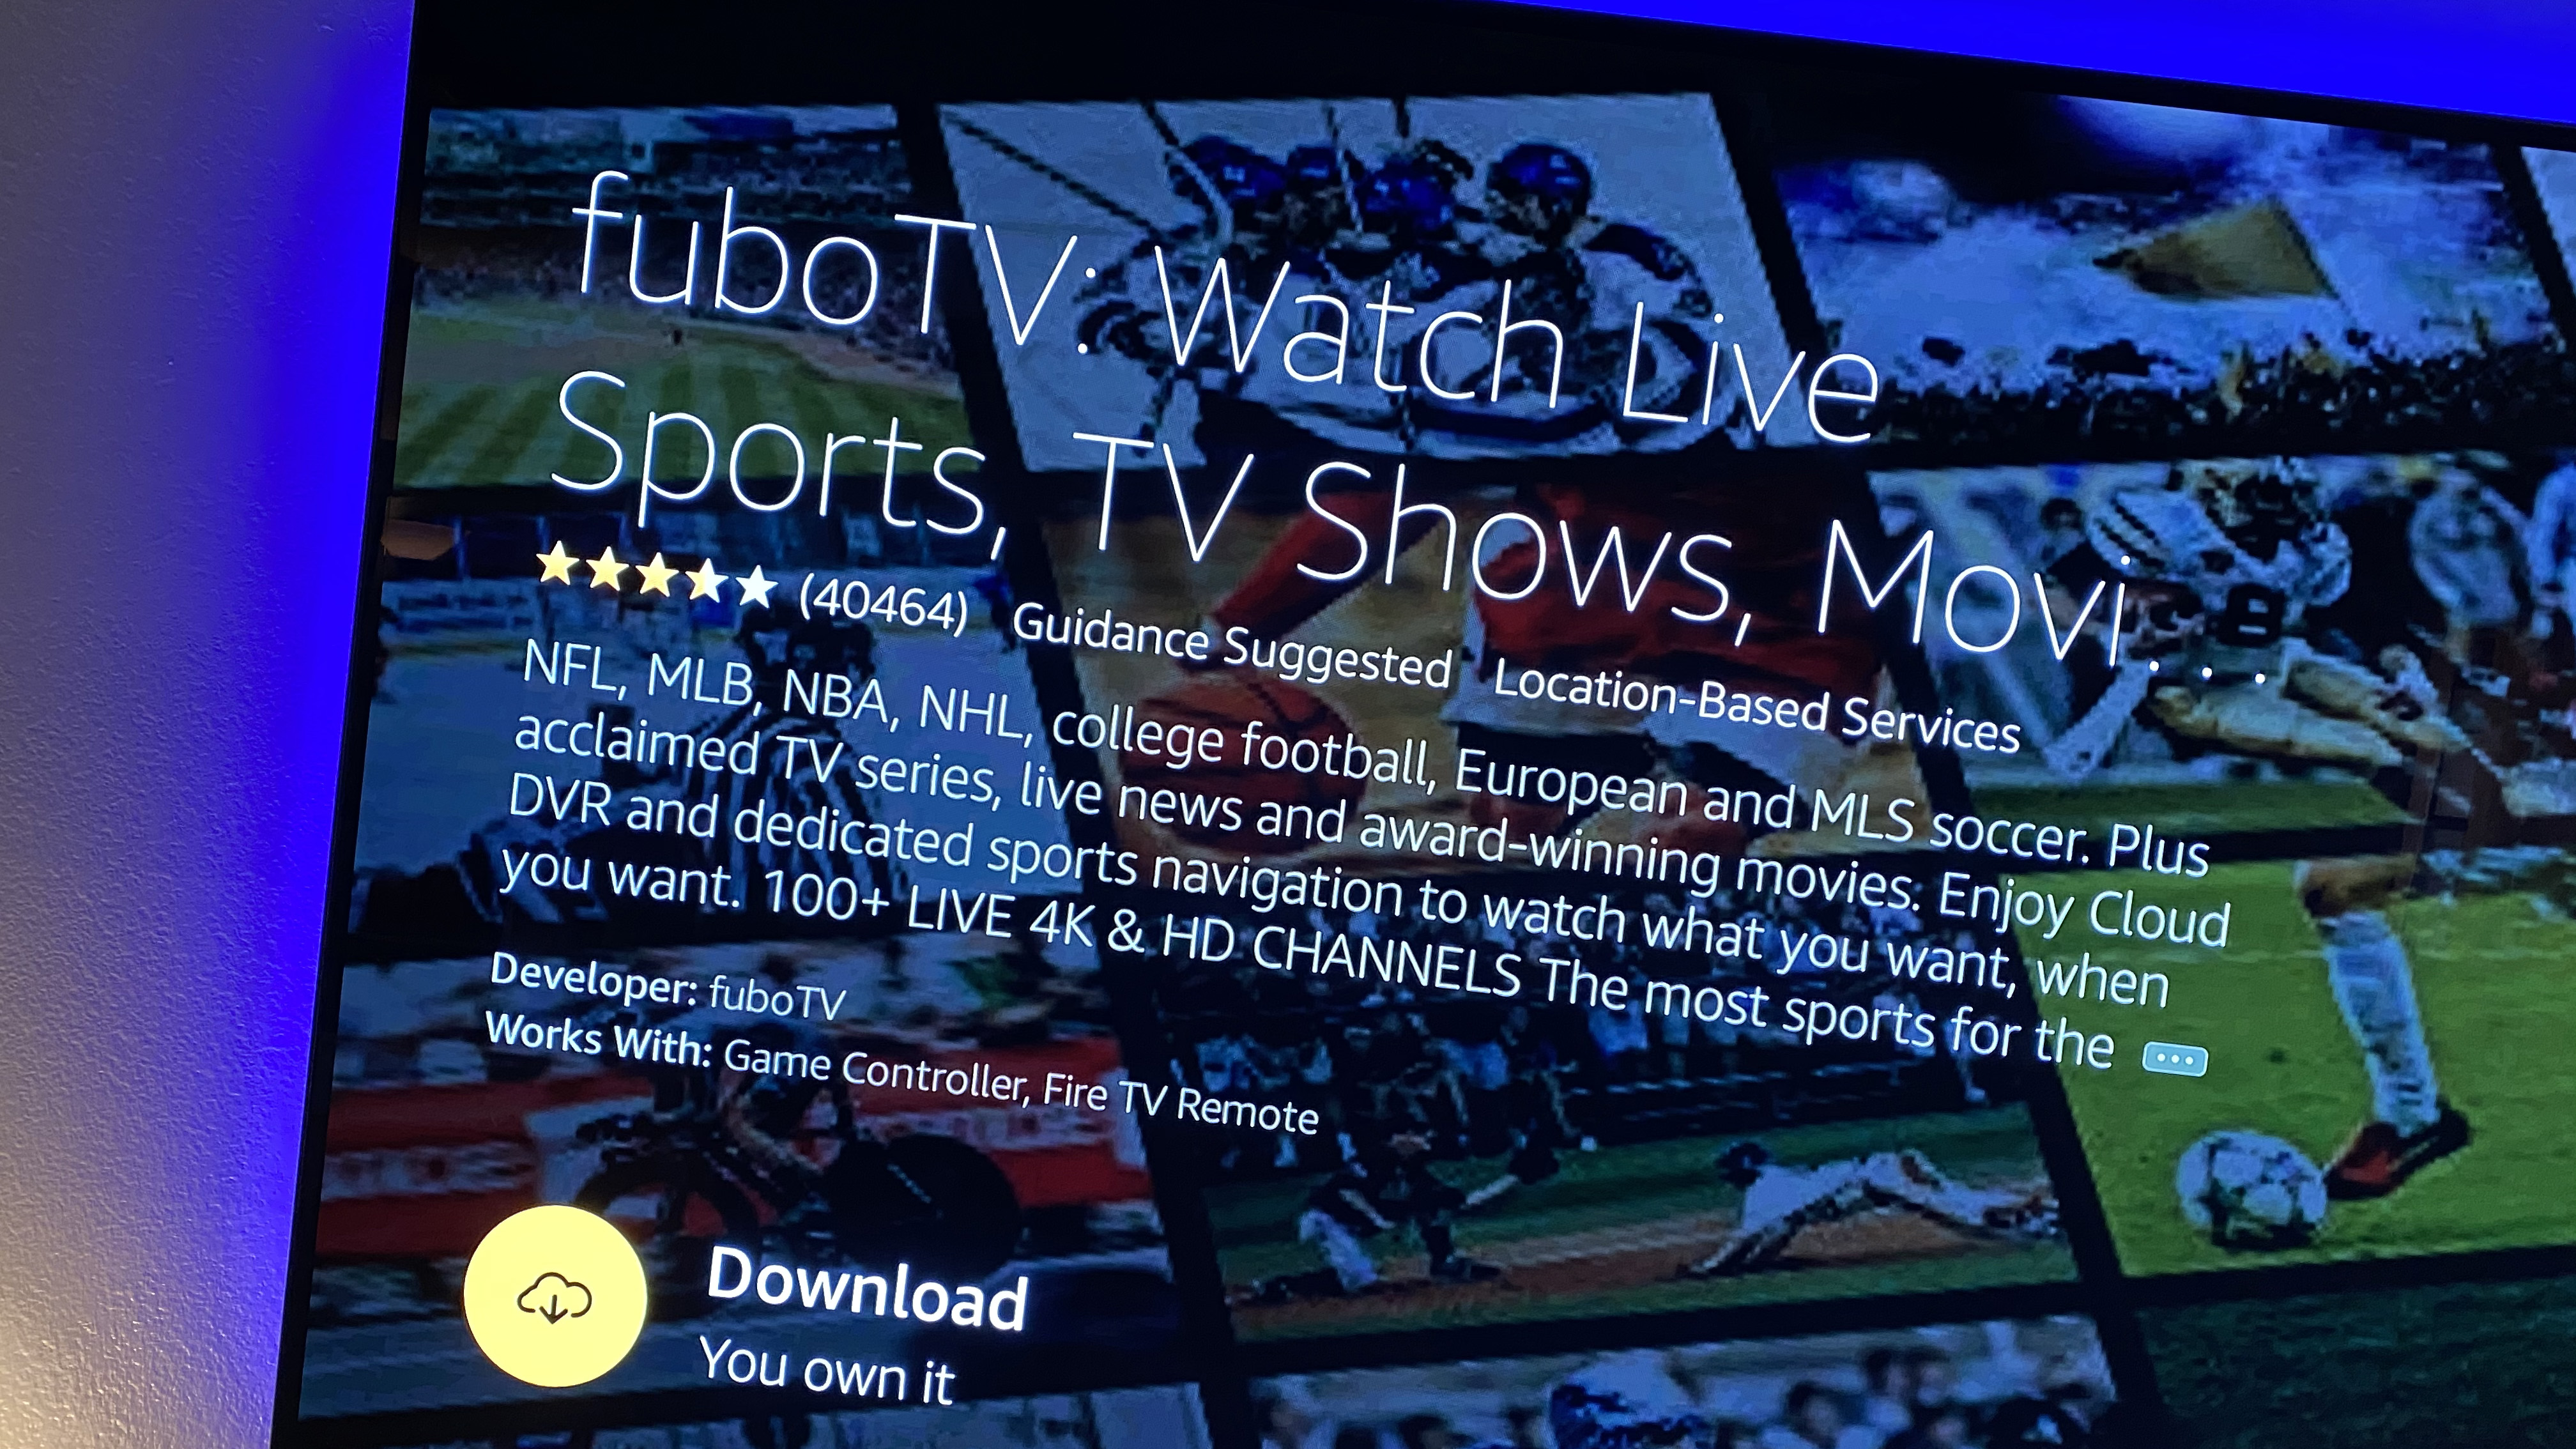 Marquee Sports Network, regional sports channels and streaming